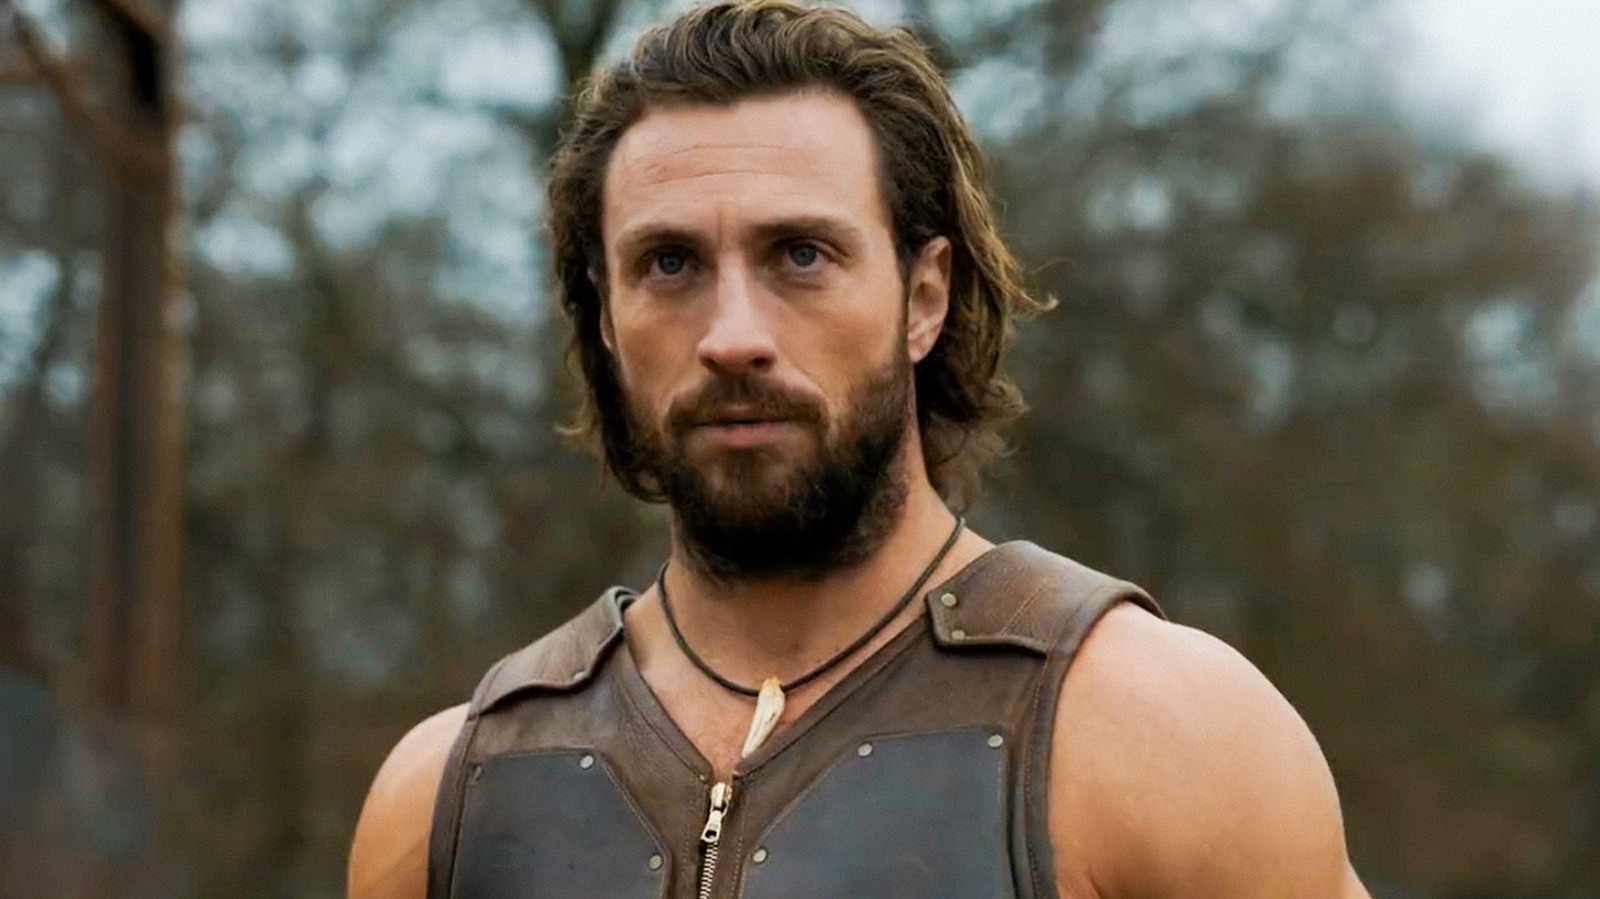 Kraven The Hunter trailer: Aaron Taylor-Johnson is on the prowl